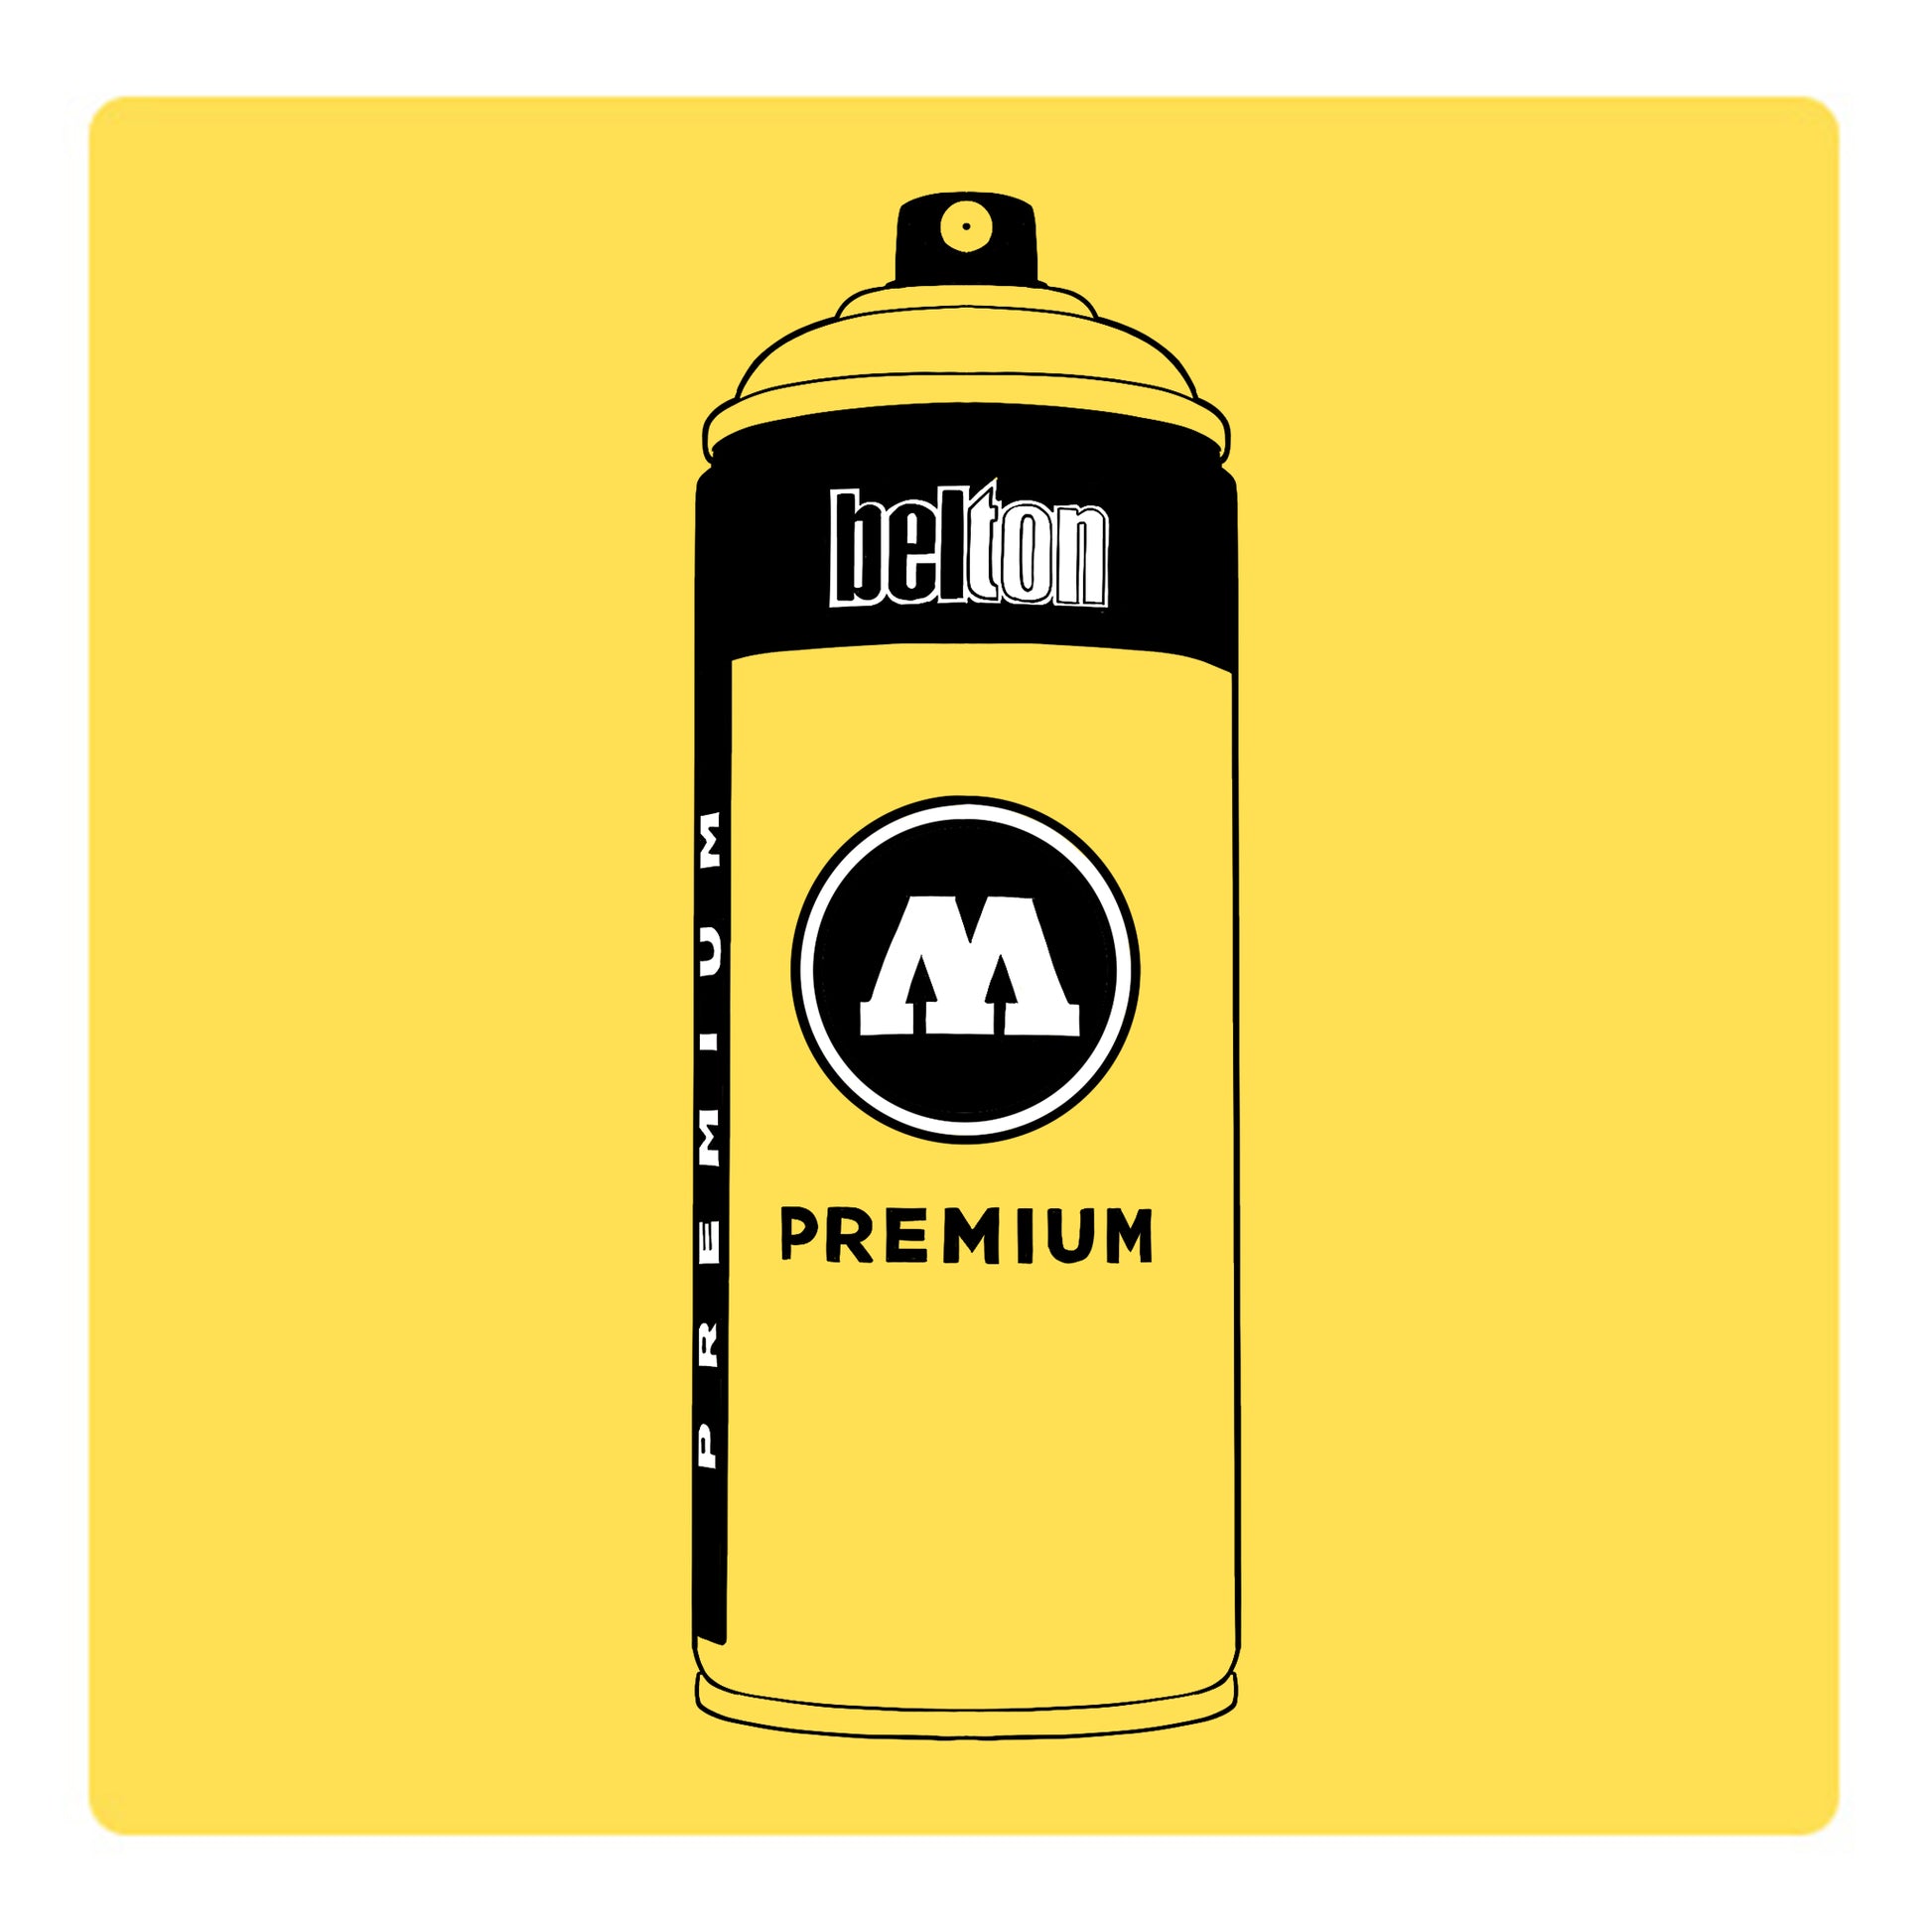 A black outline drawing of a pastel yellow spray paint can with the words "belton","premium" and the letter"M" written on the face in black and white font. The background is a color swatch of the same pastel yellow with a white border.